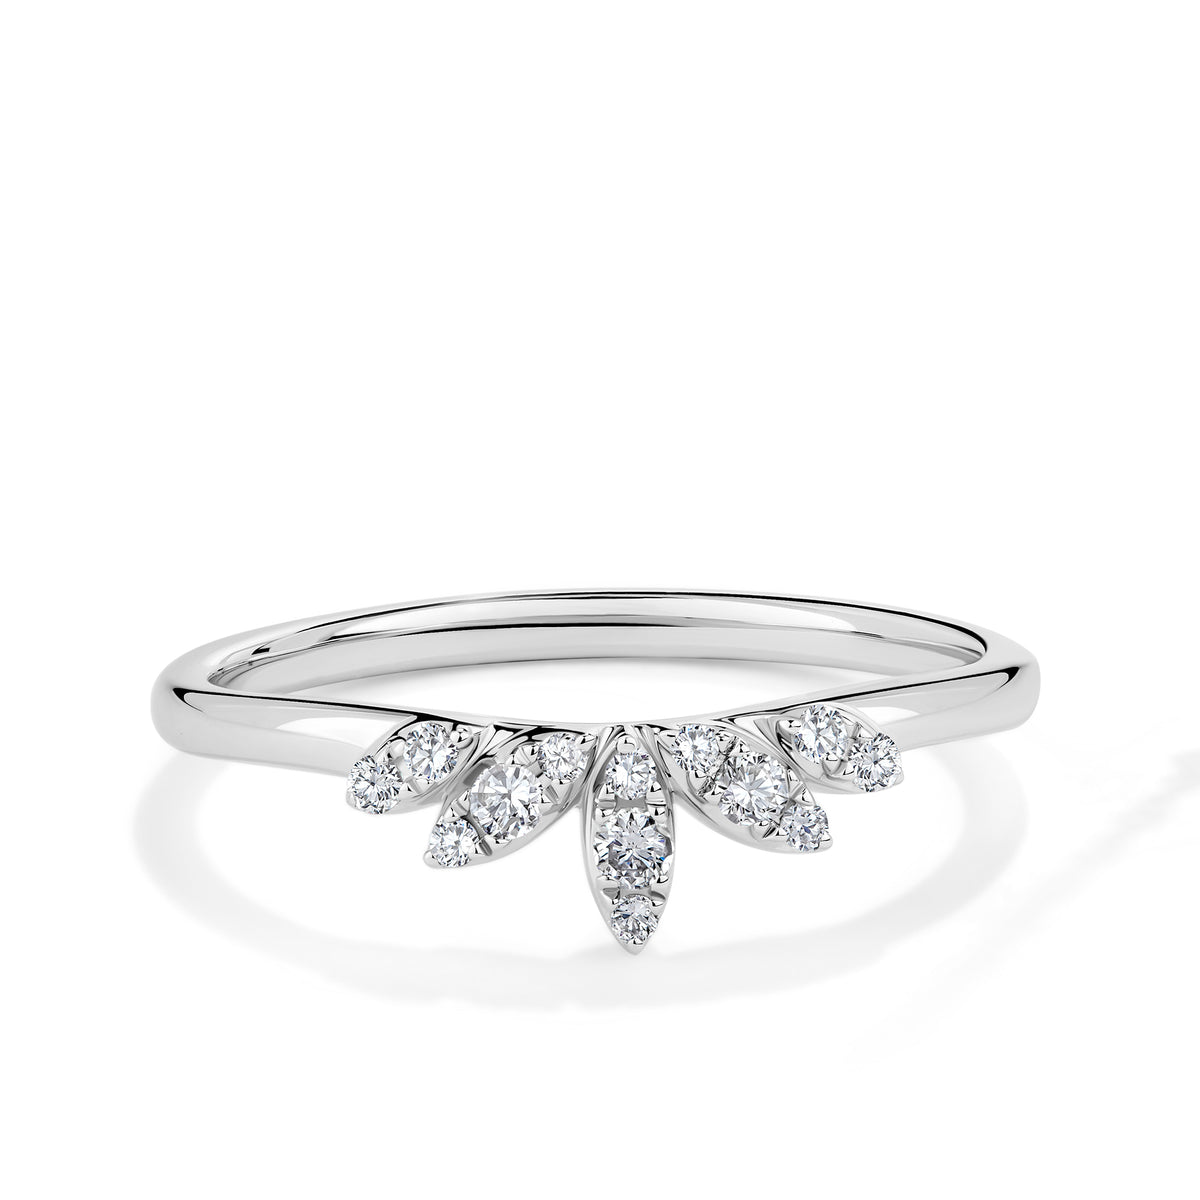 Marquise Round Diamond Ring in 9ct White Gold